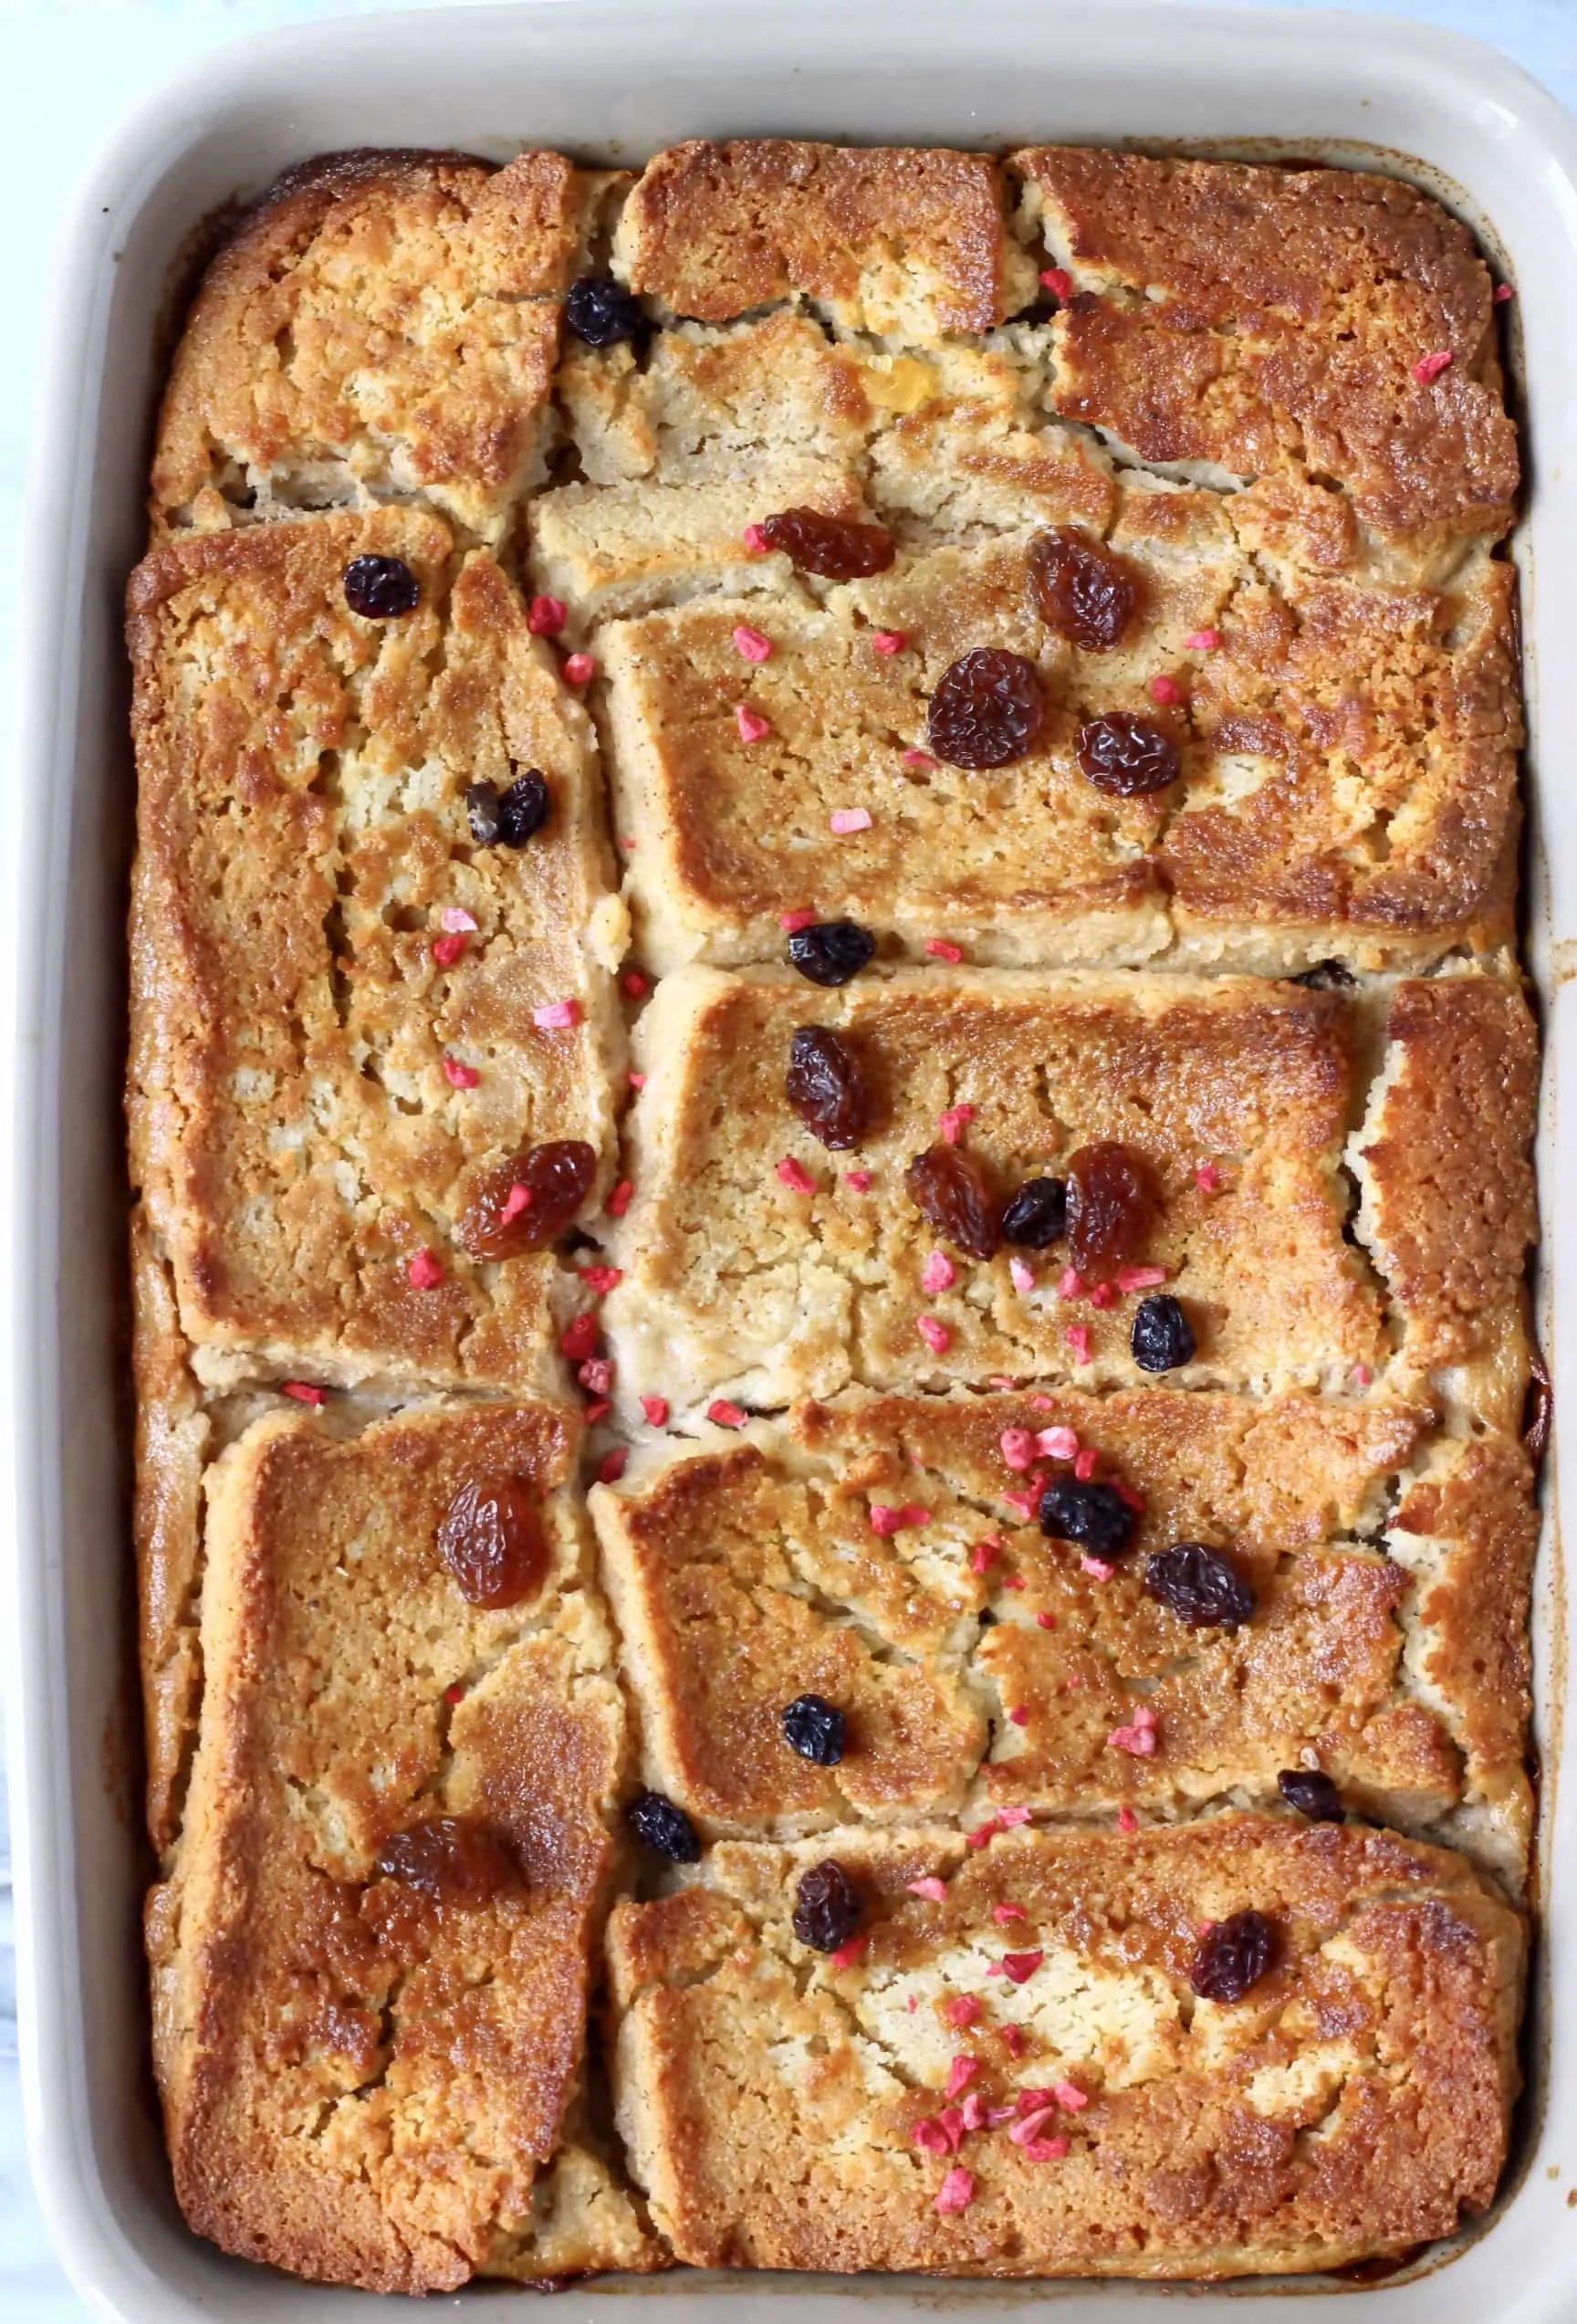 Bread pudding with raisins in a grey baking dish